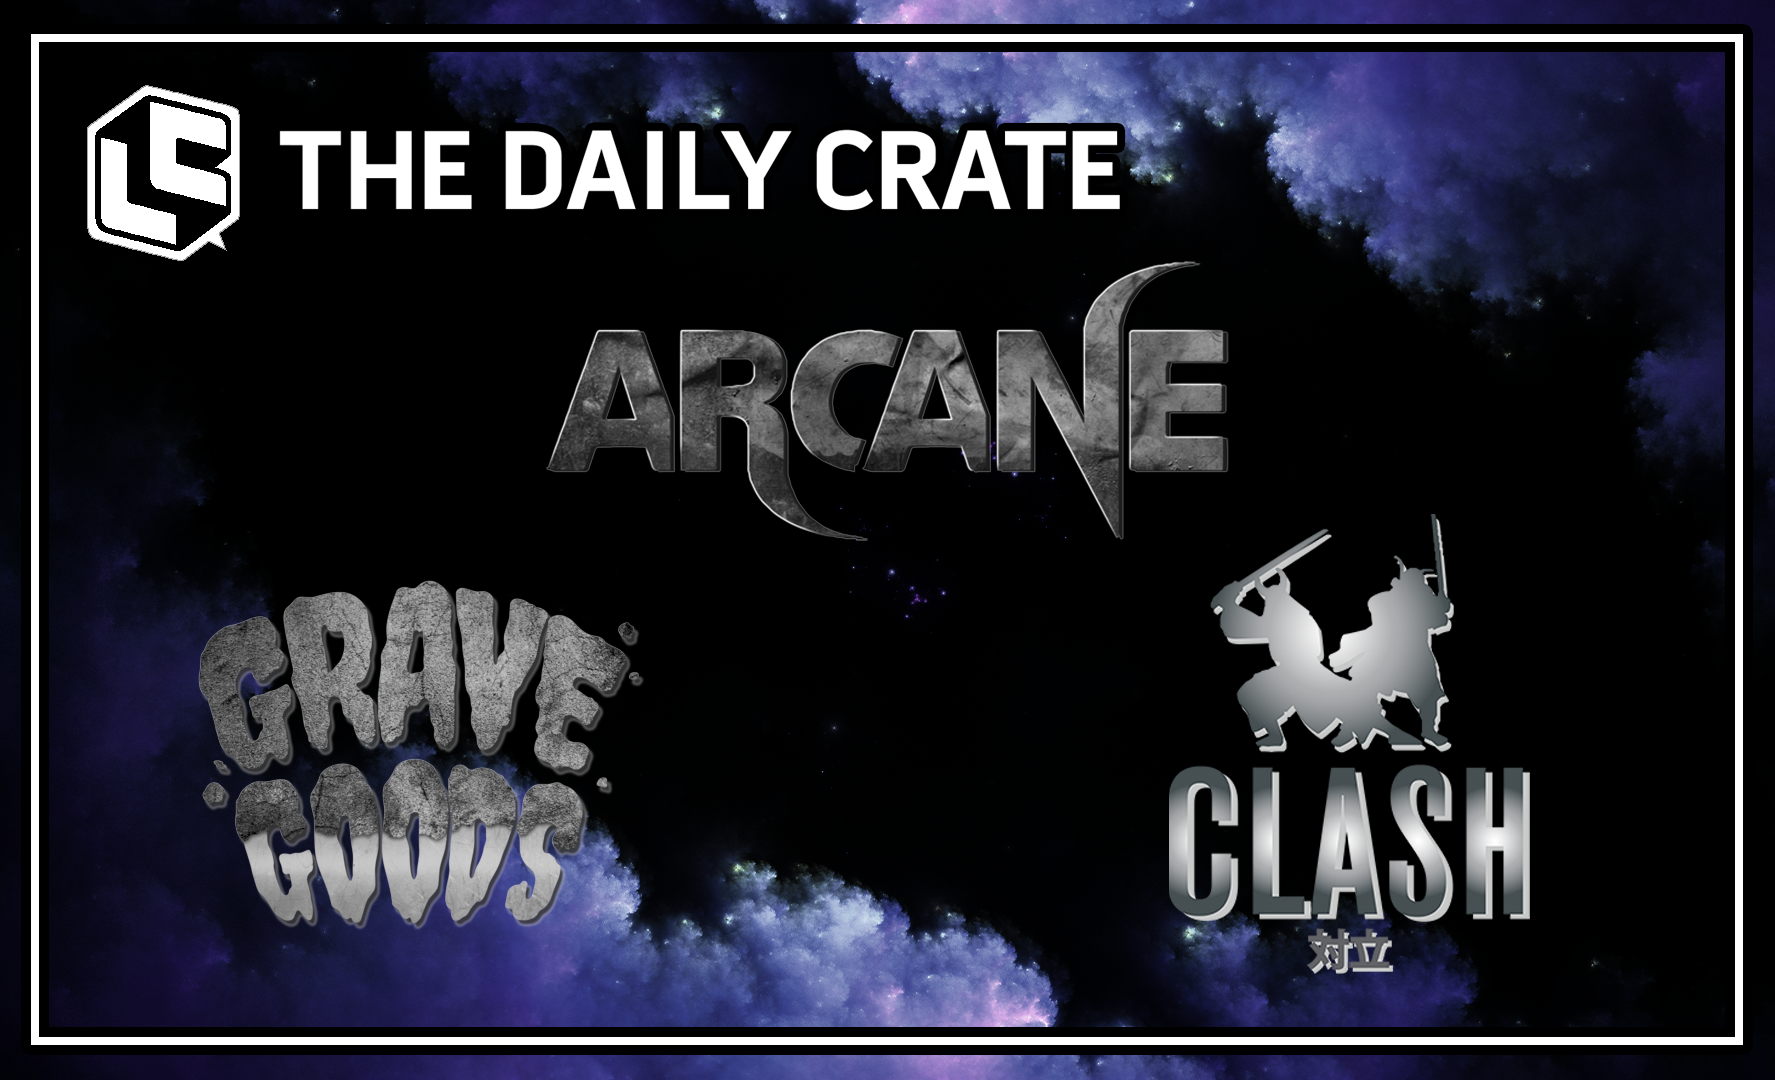 The Daily Crate | THEME REVEAL: Crunchyroll, Loot Fright, and Marvel Gear + Goods